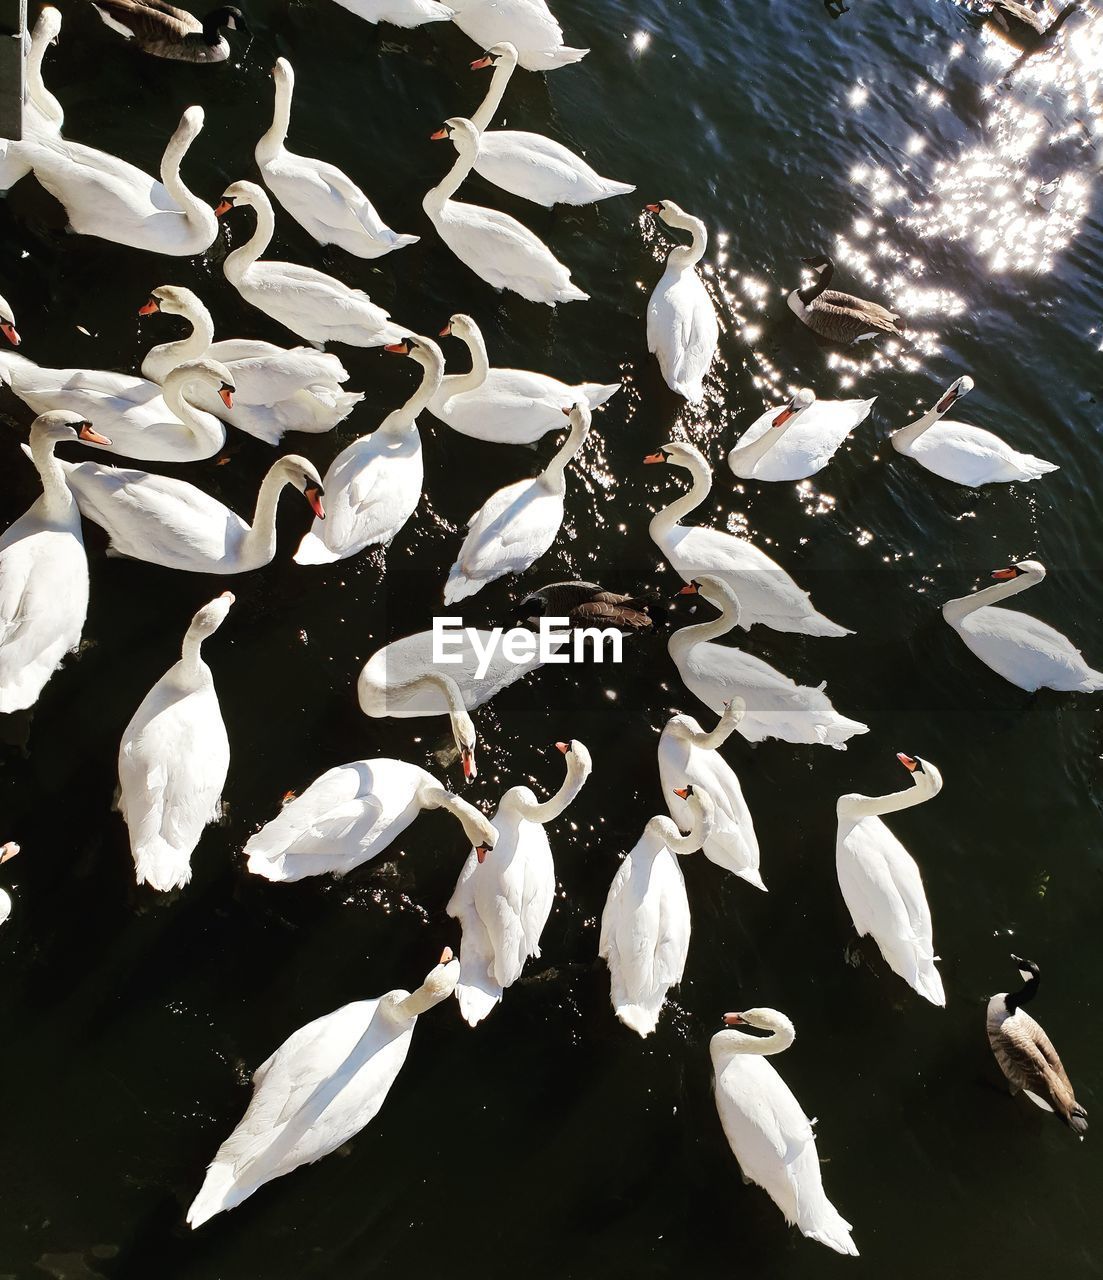 HIGH ANGLE VIEW OF BIRDS SWIMMING IN LAKE